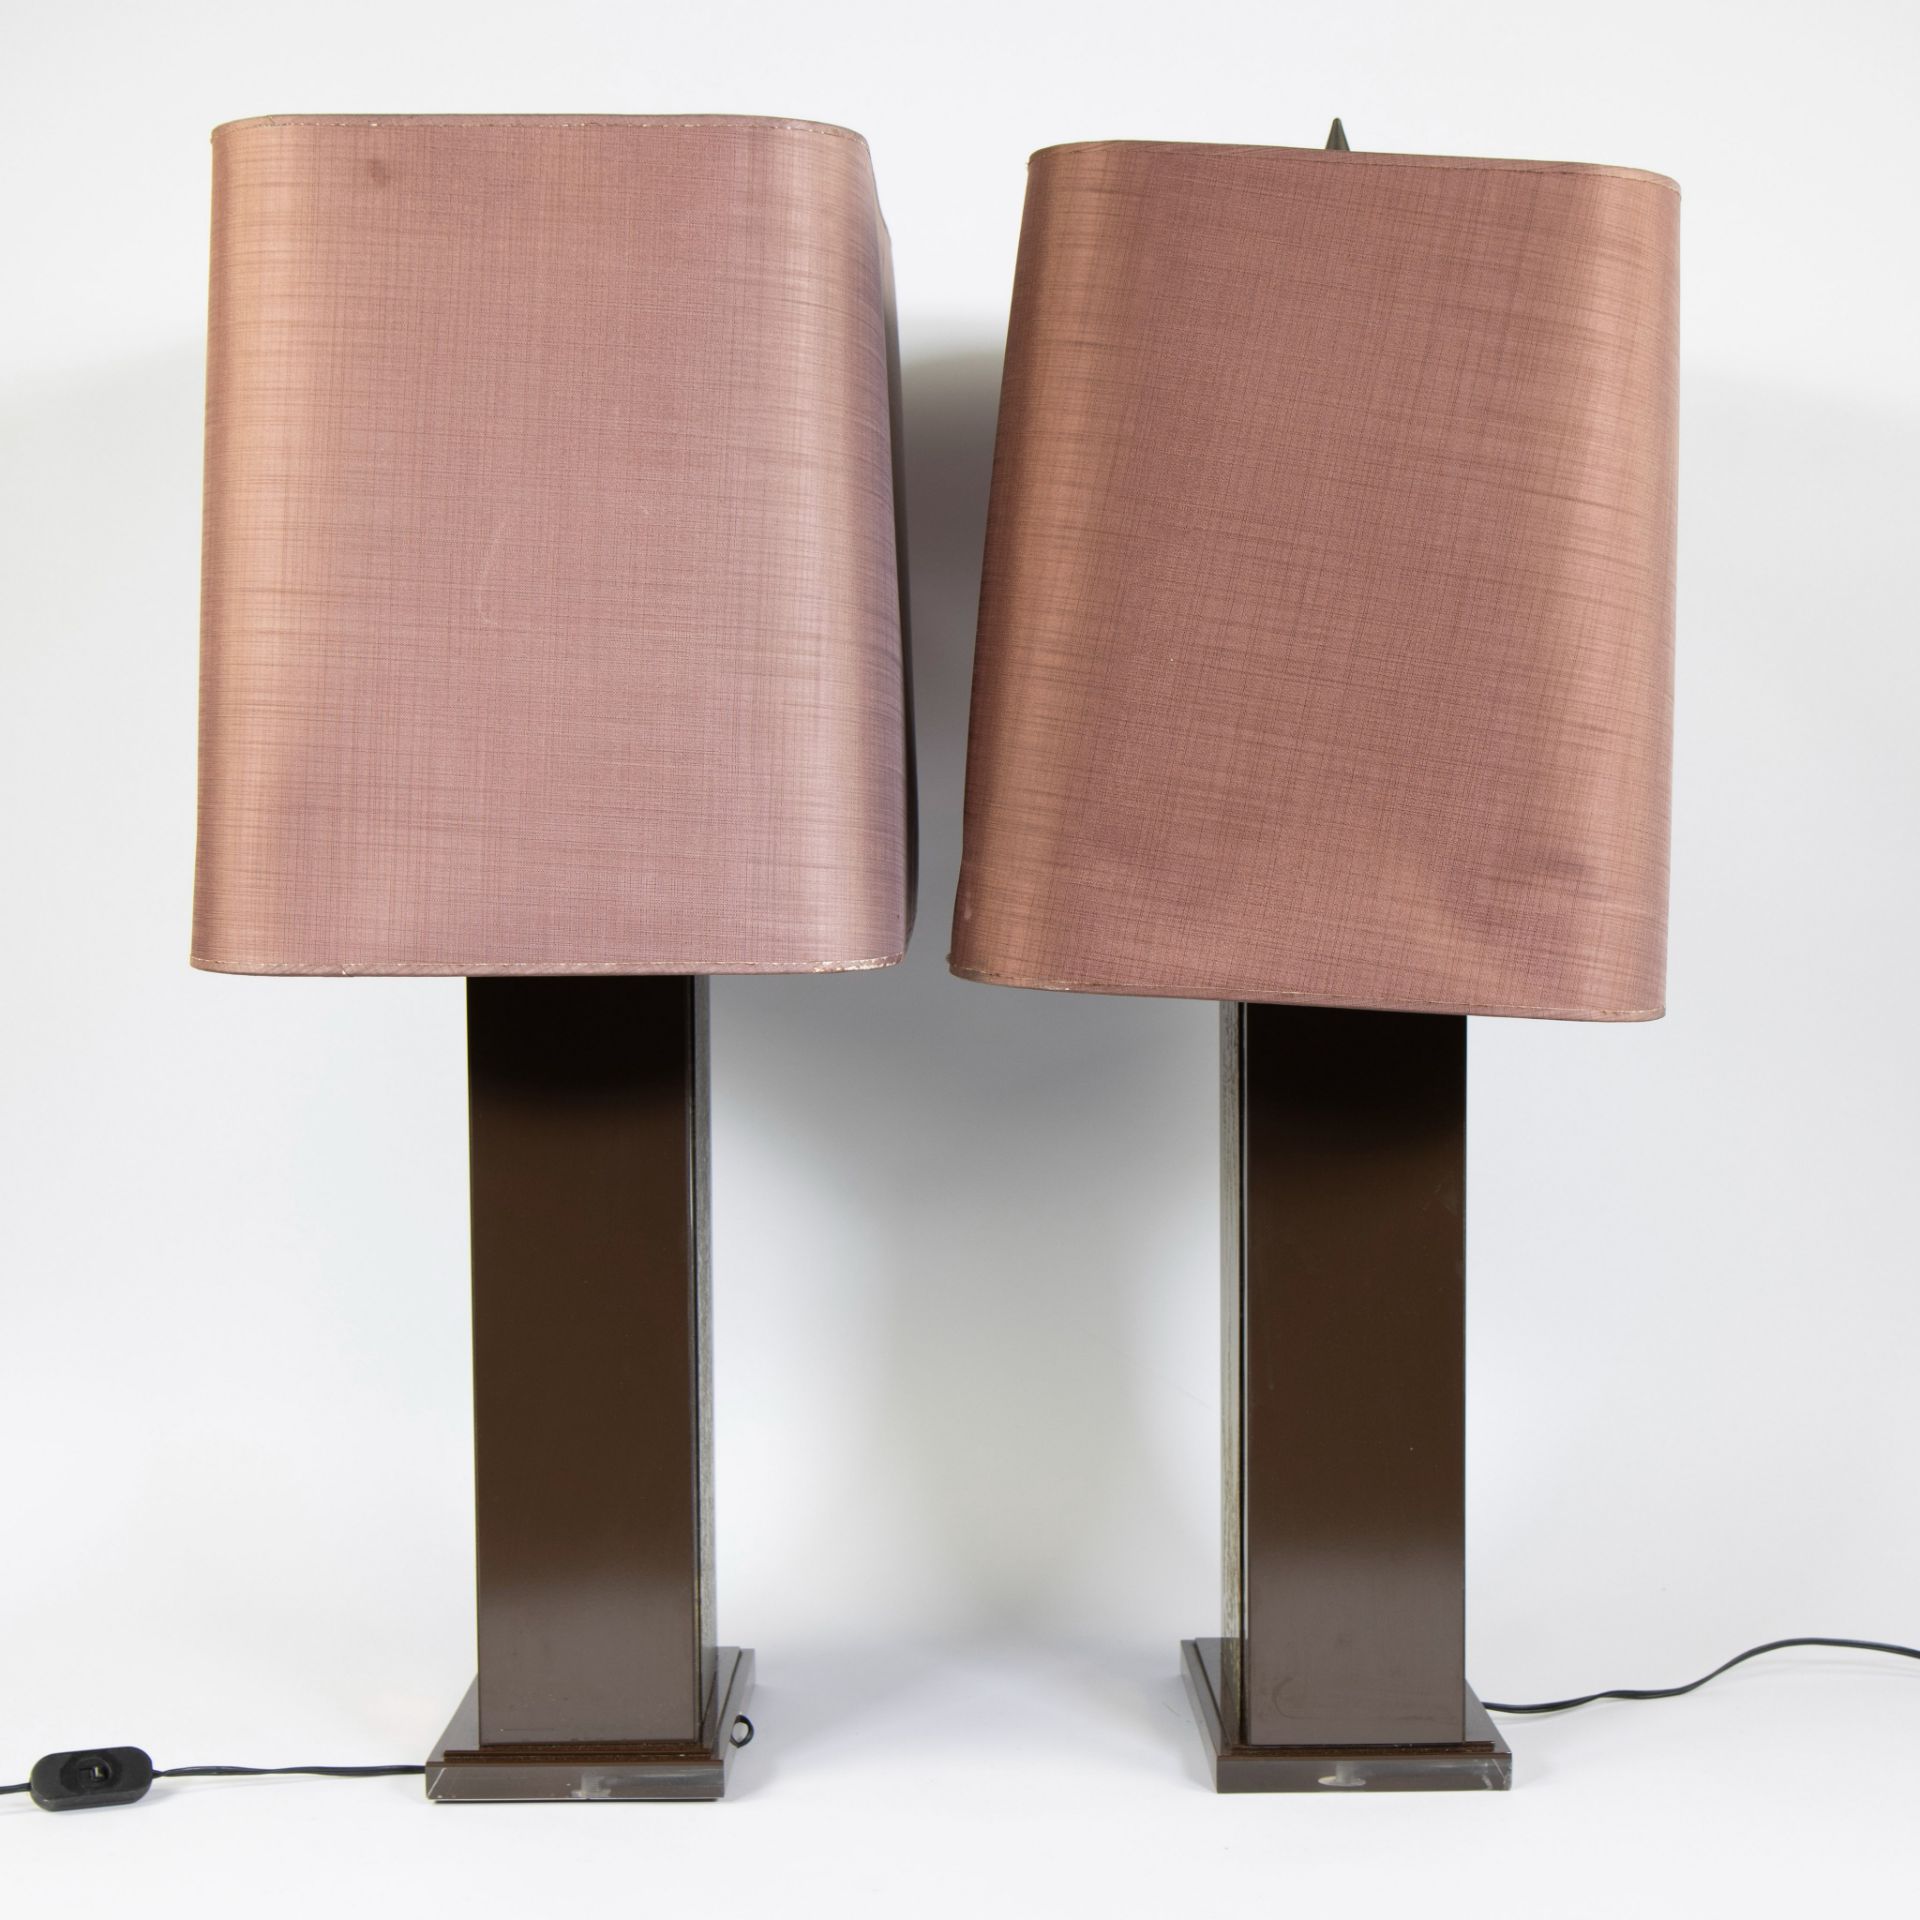 Pair of etched brass 1970s lamps by Georges Mathias - Image 2 of 4